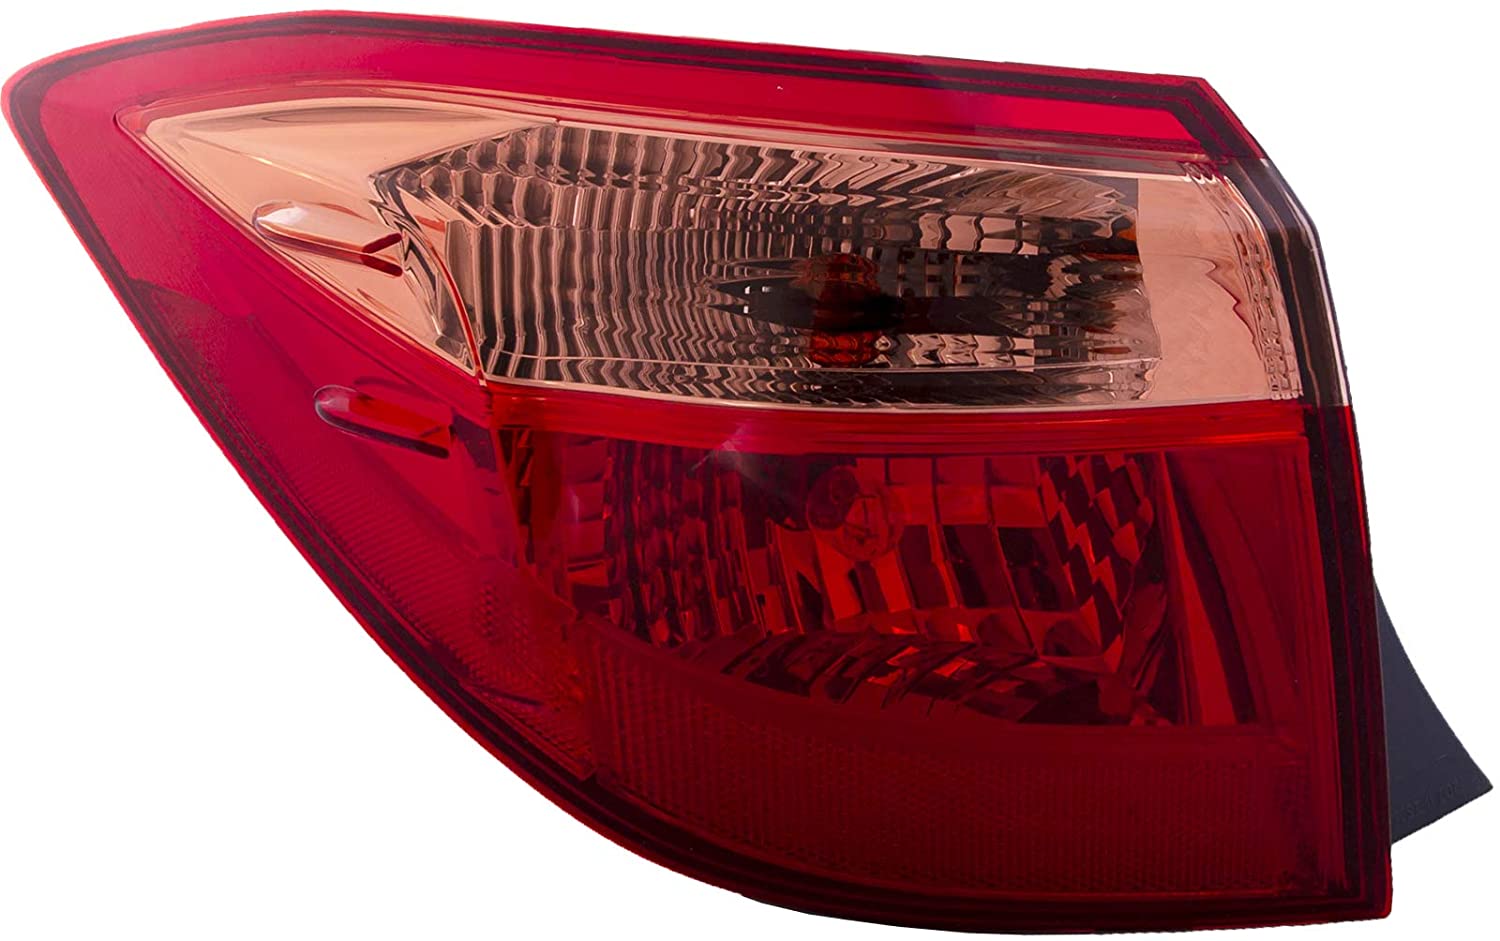 HEADLIGHTSDEPOT CAPA Tail Light Outer Body Mounted Compatible With Toyota Corolla 2017-2019 E L LE ECO Models Includes Left Driver Side Tail Light